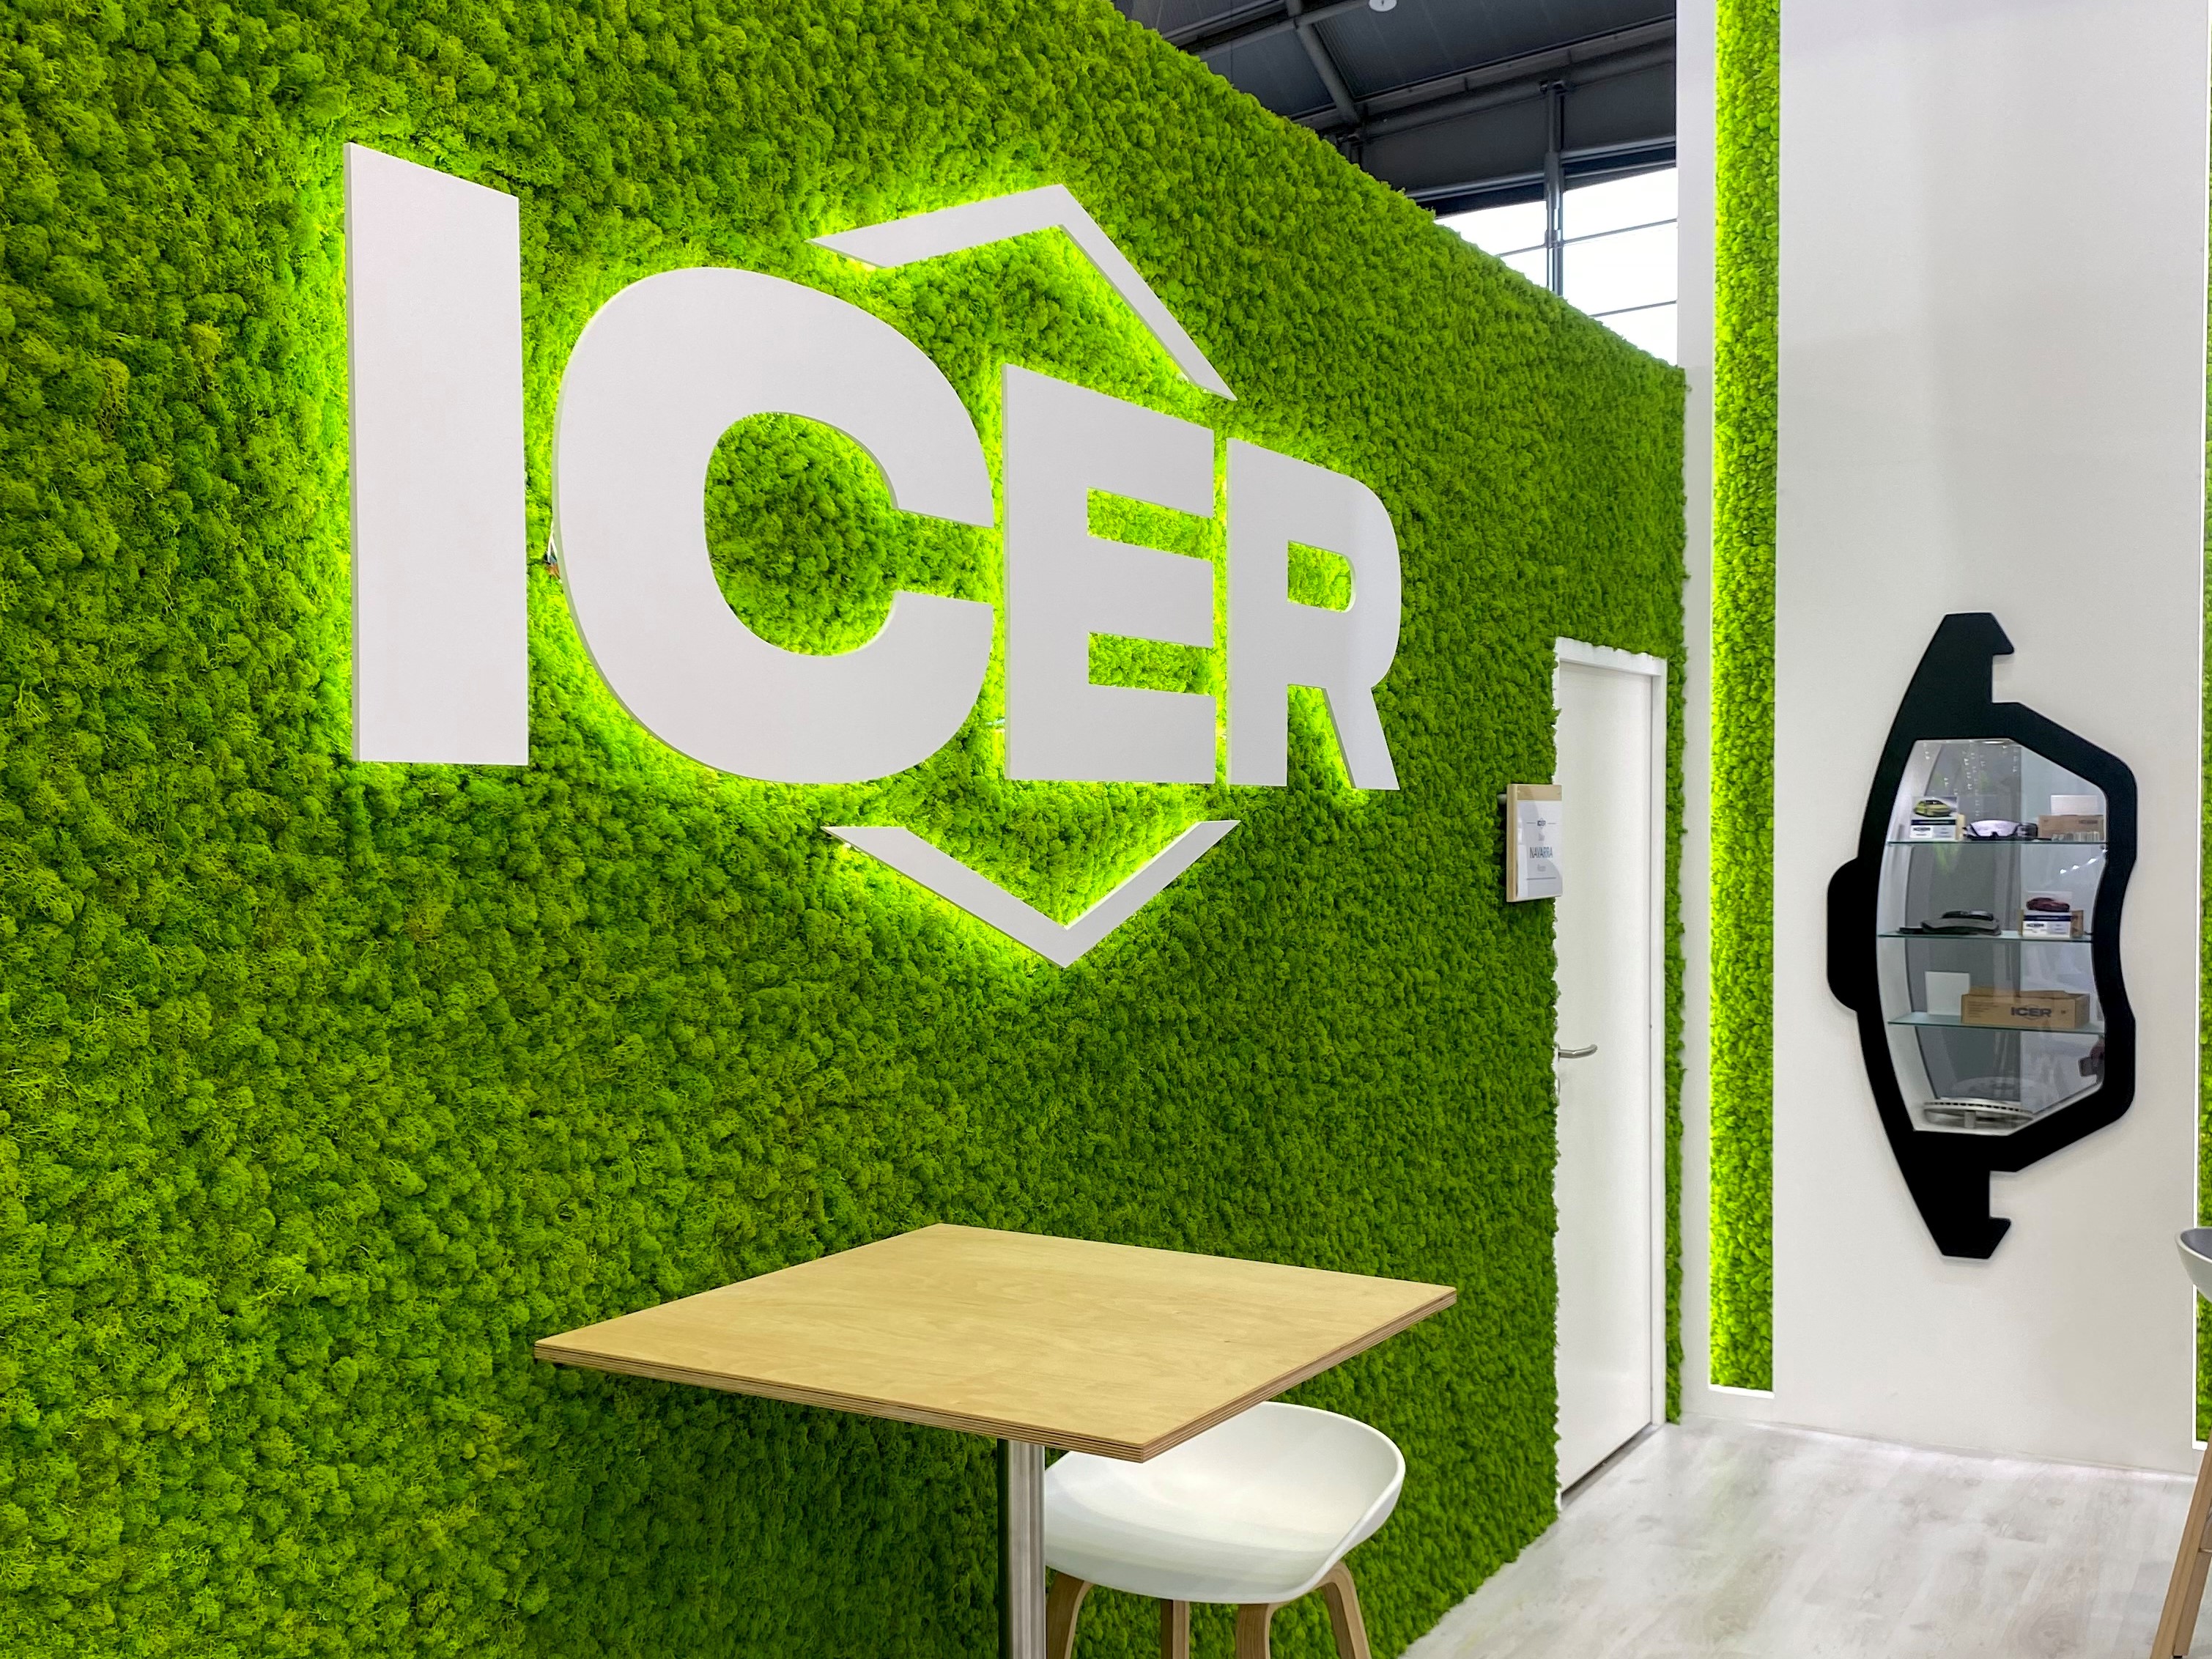 Icer Brakes presents two new product lines at Automechanika Frankfurt 